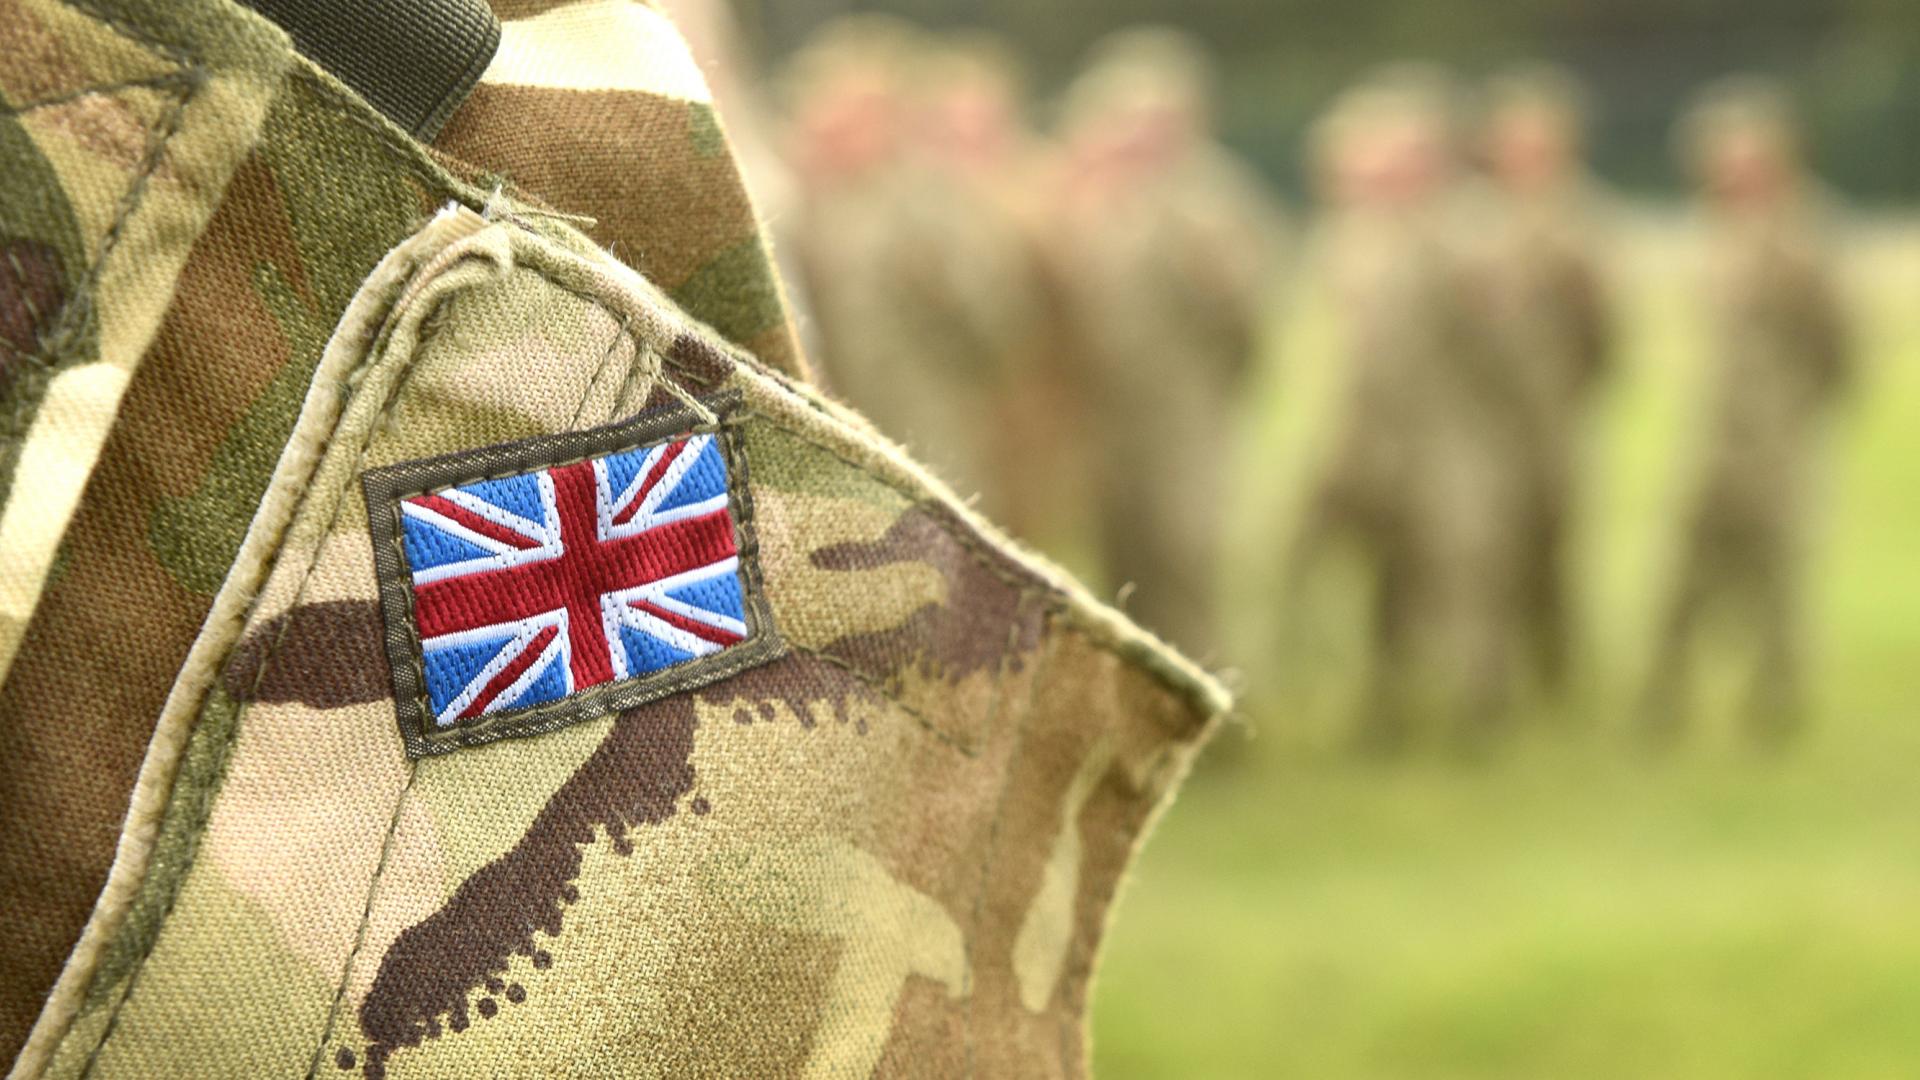 Soldier with UK flag on clothes